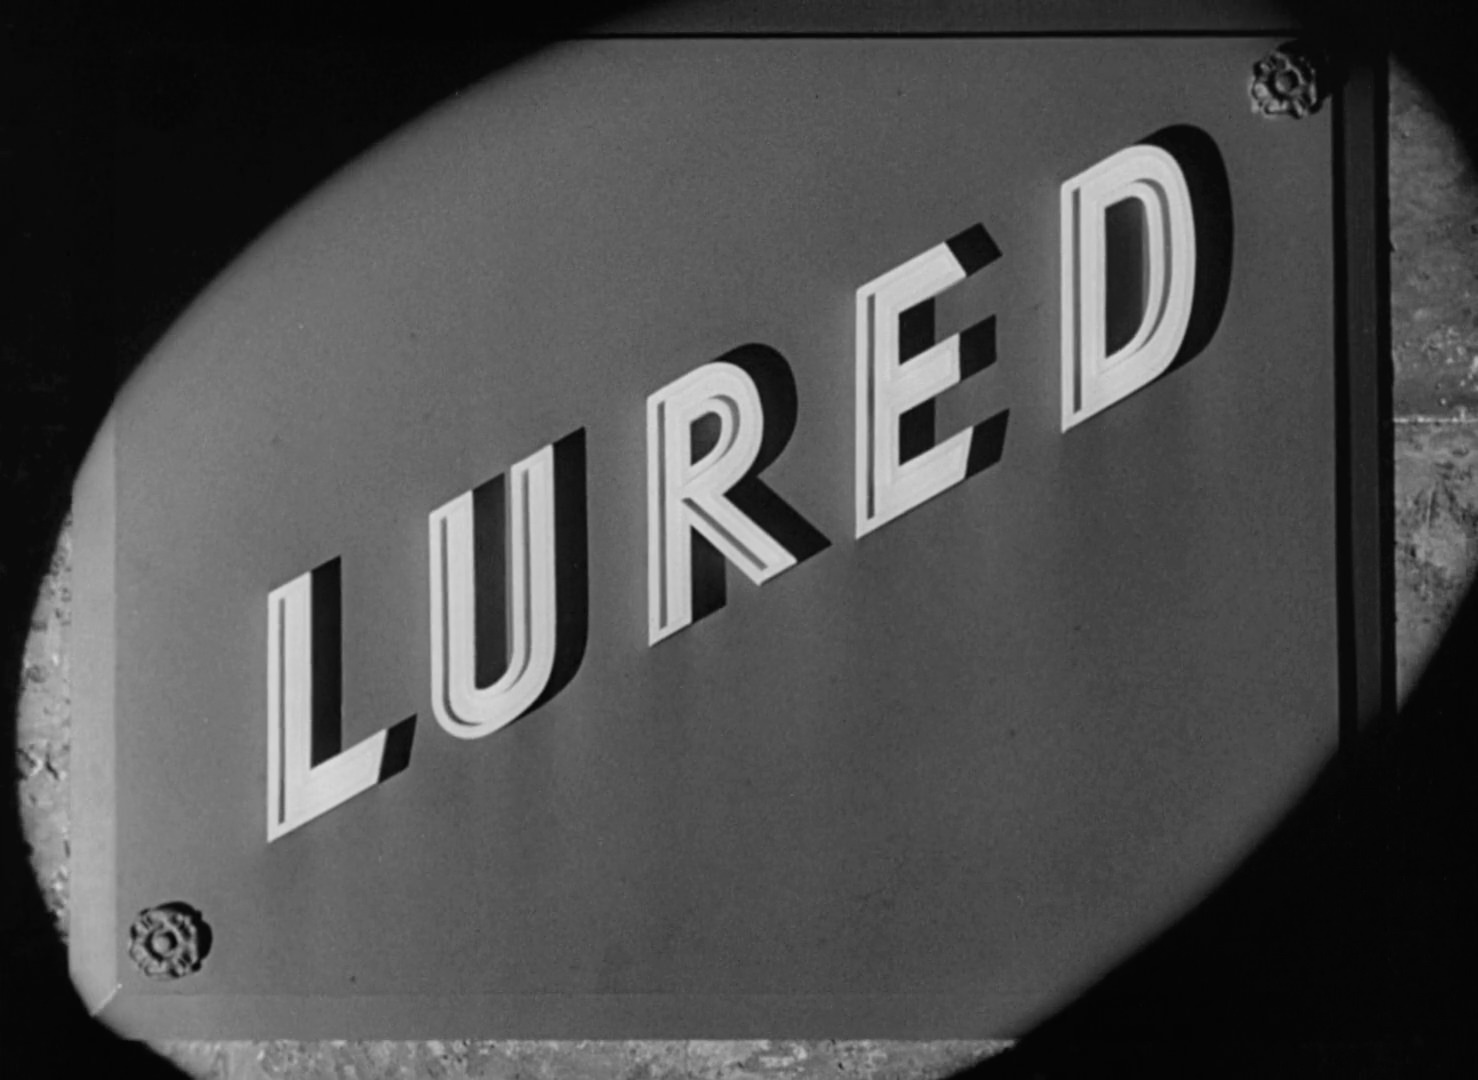 Lured Title Card